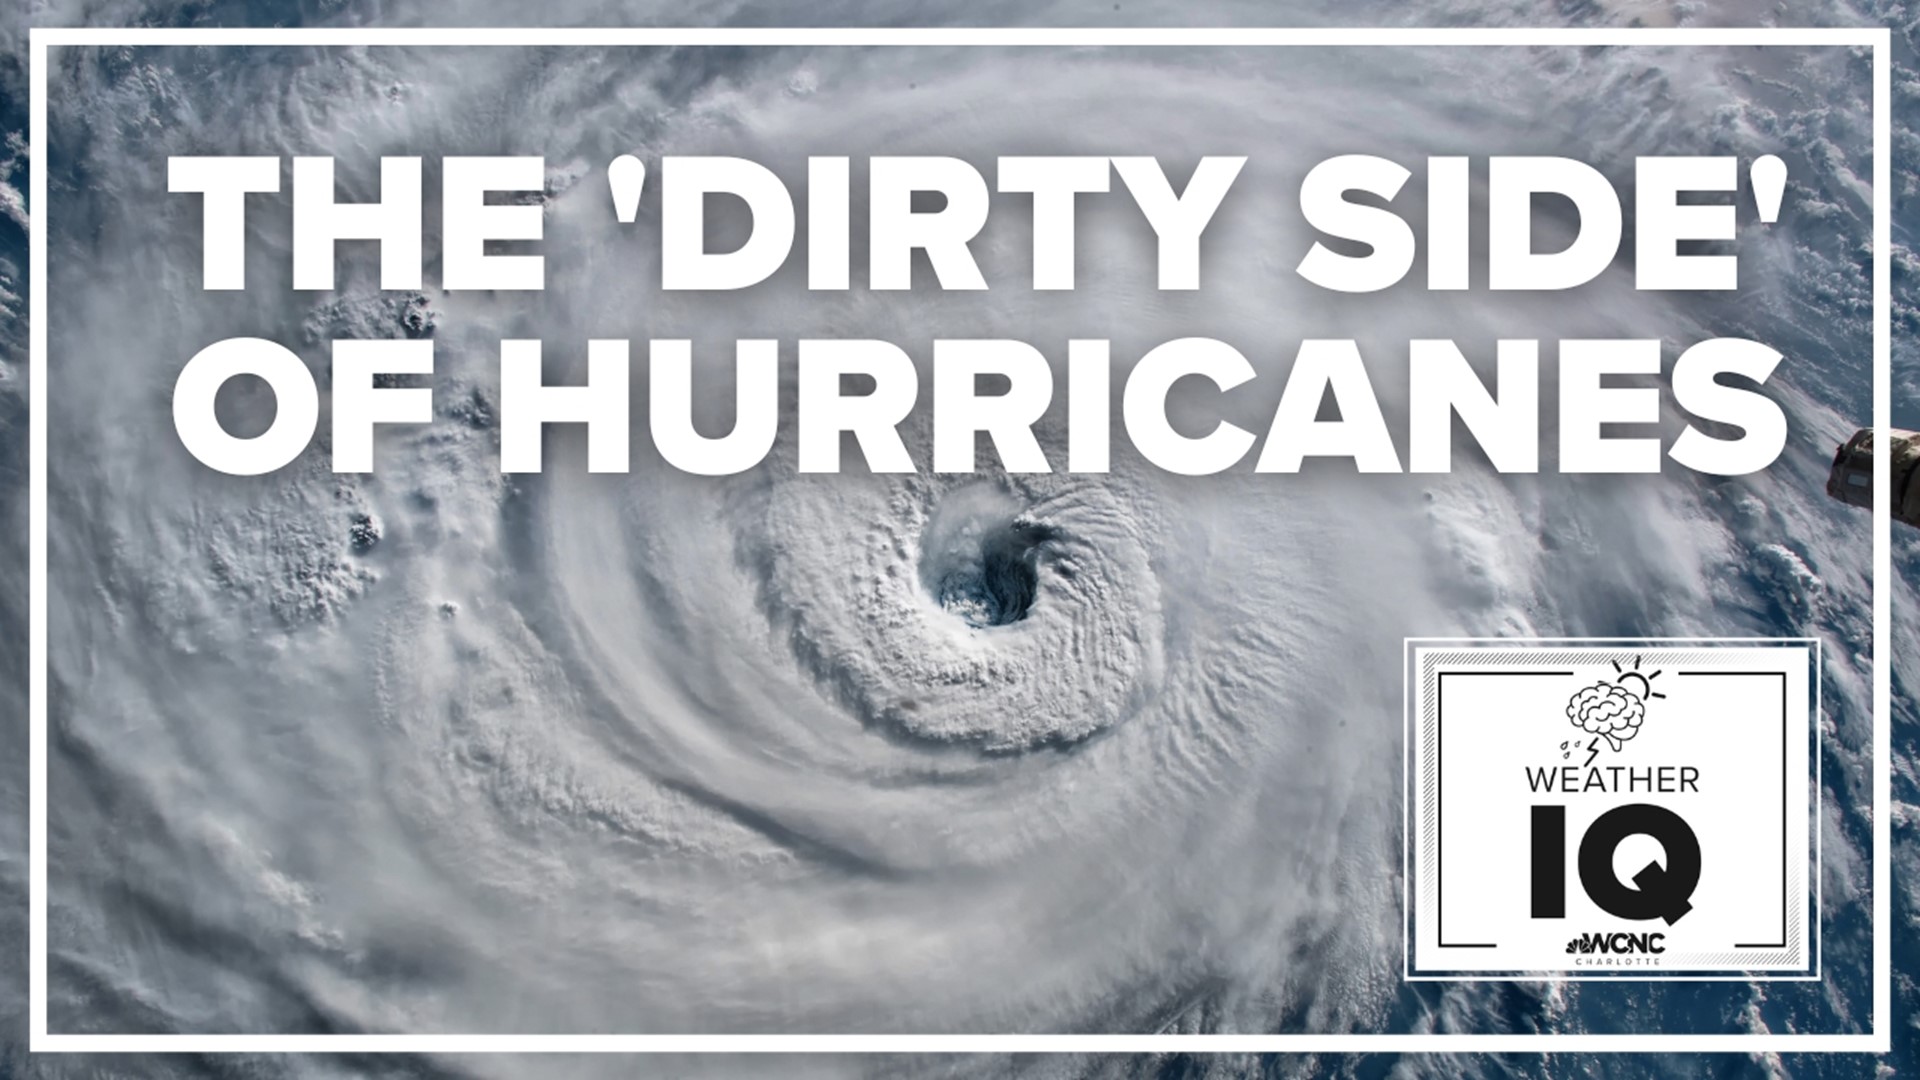 While every part of a hurricane has an impact, there is one part that is known as the "dirty side"